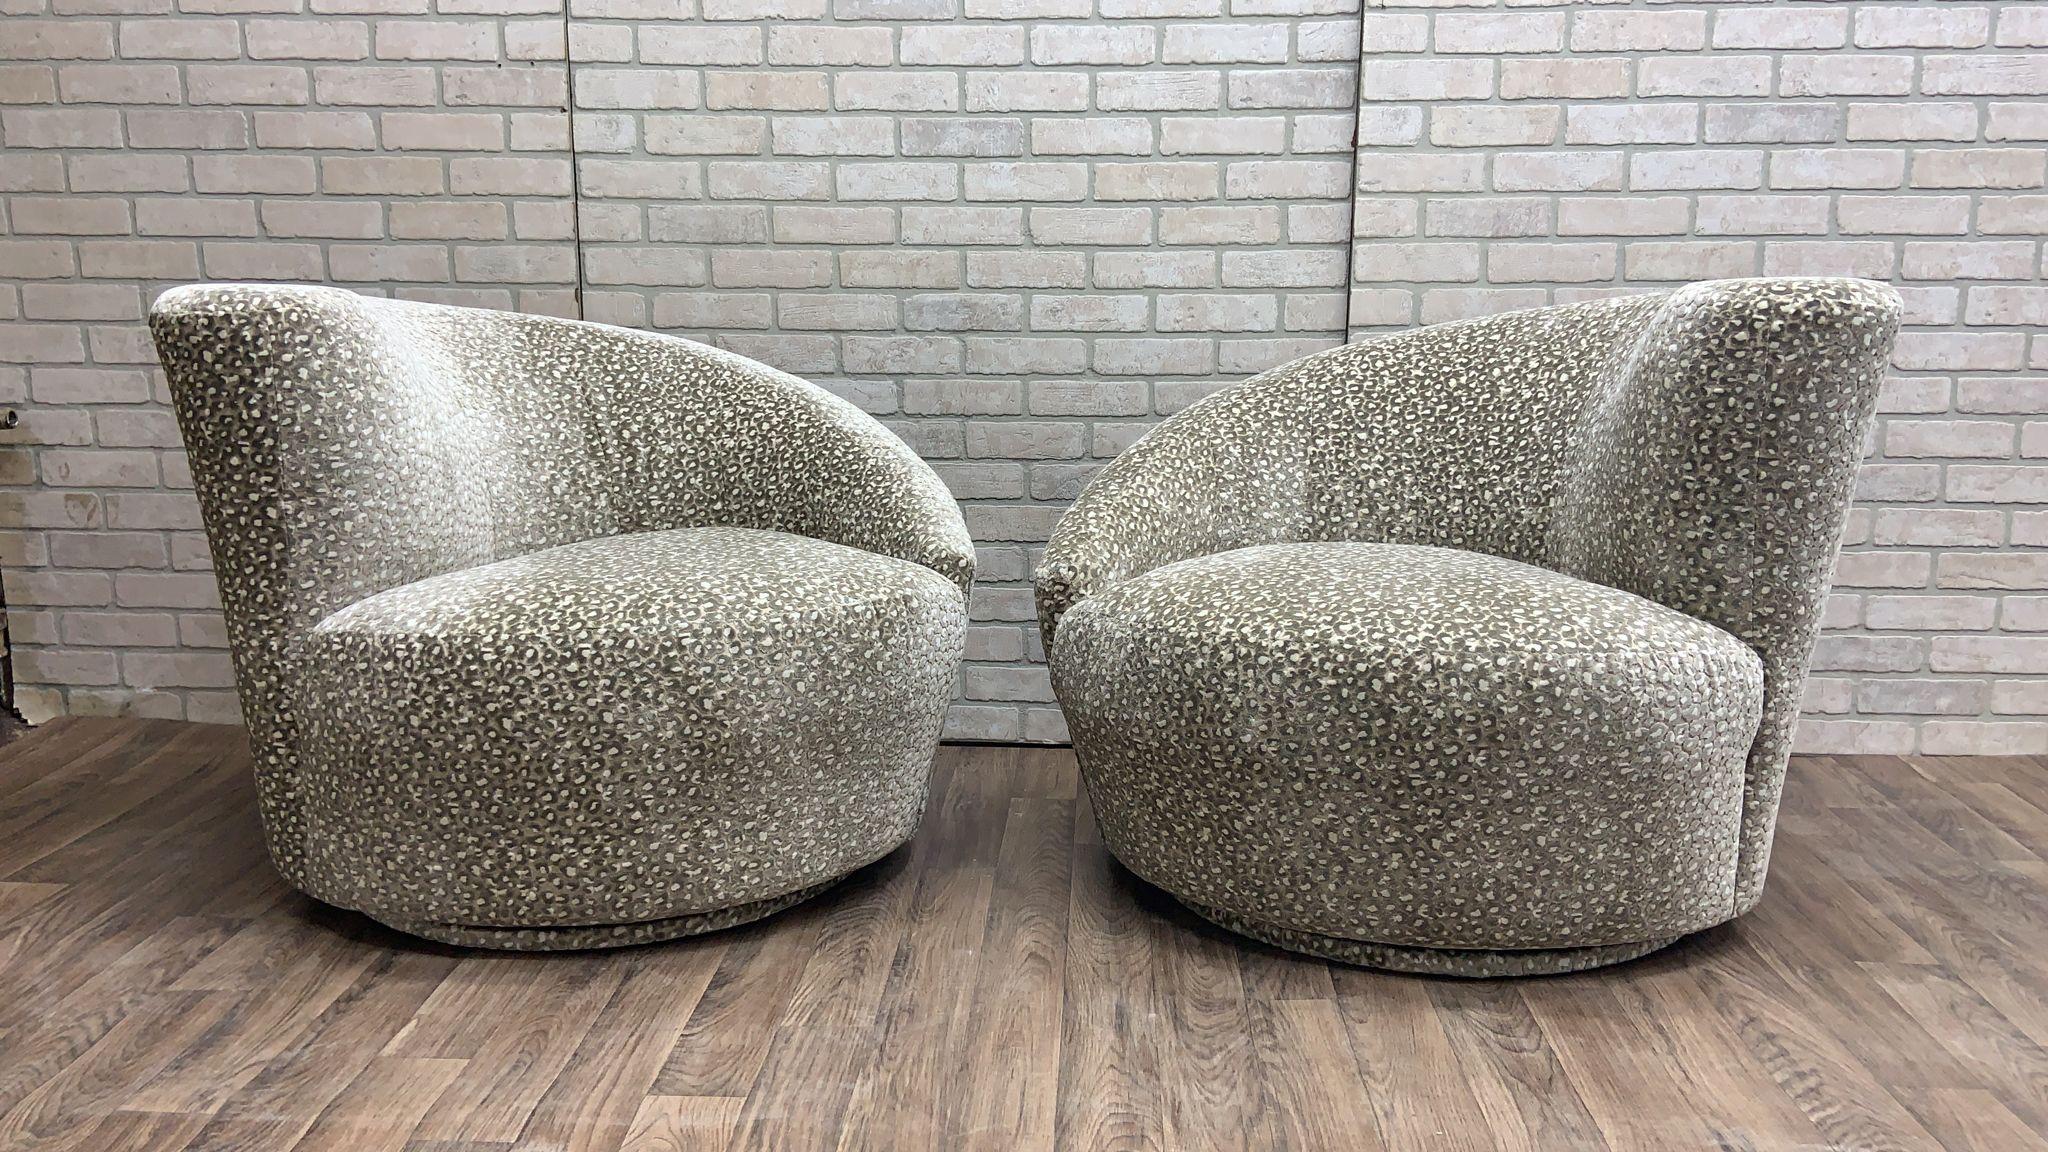 Hand-Crafted Vladimir Kagan Style Asymmetrical Swivel “Nautilus” Weiman Lounge Chairs - Pair For Sale